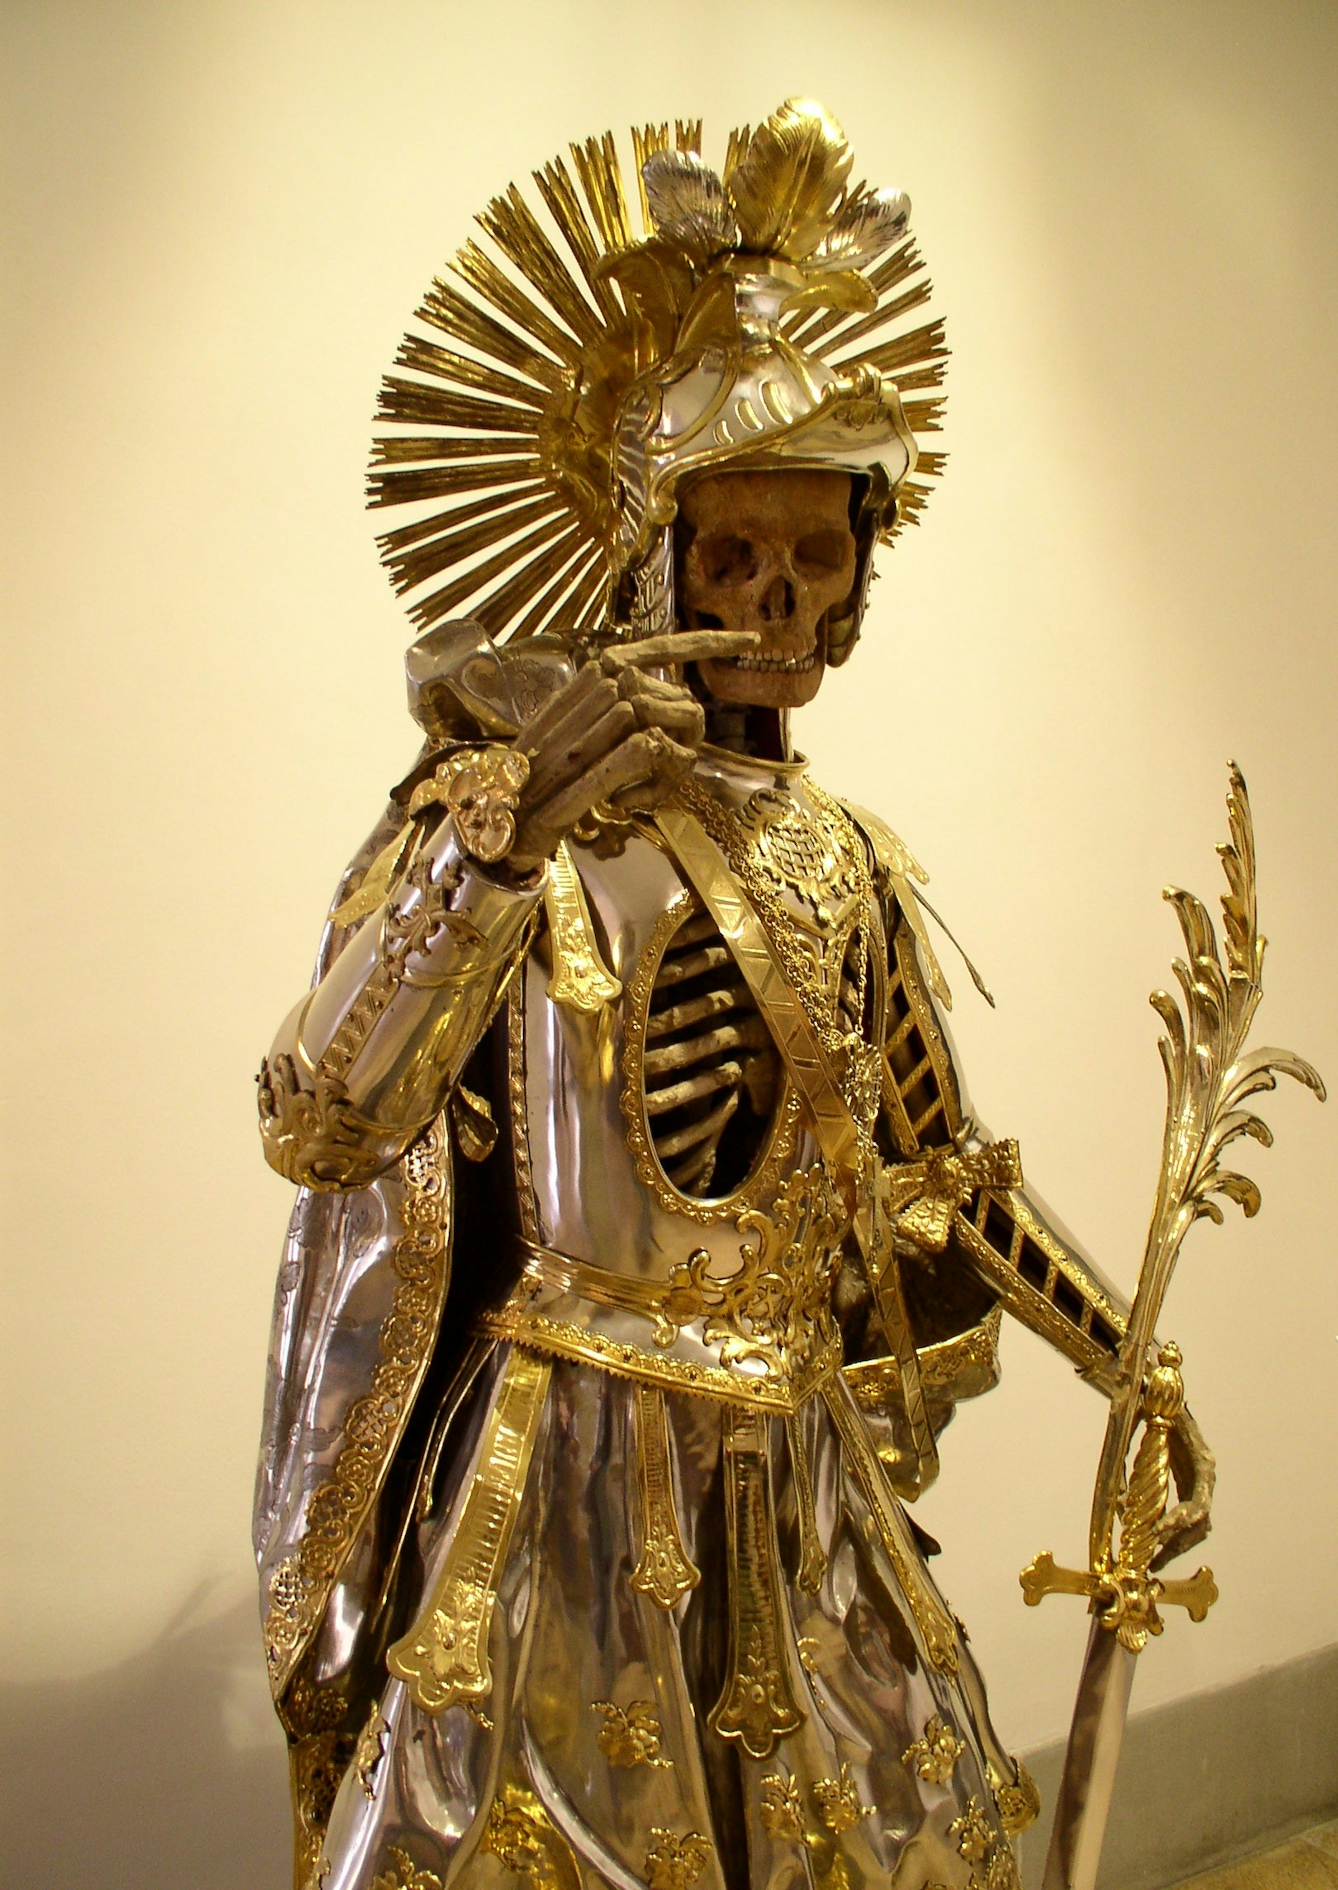 Colour photograph of a relic from the Holy Catacombs of Pancratius, showing a skeleton in intricate and lavish gold armour, with right arm raised and index finger pointing. The armour features a large helmet headdress and a highly ornate sword leaning on the left hand. 